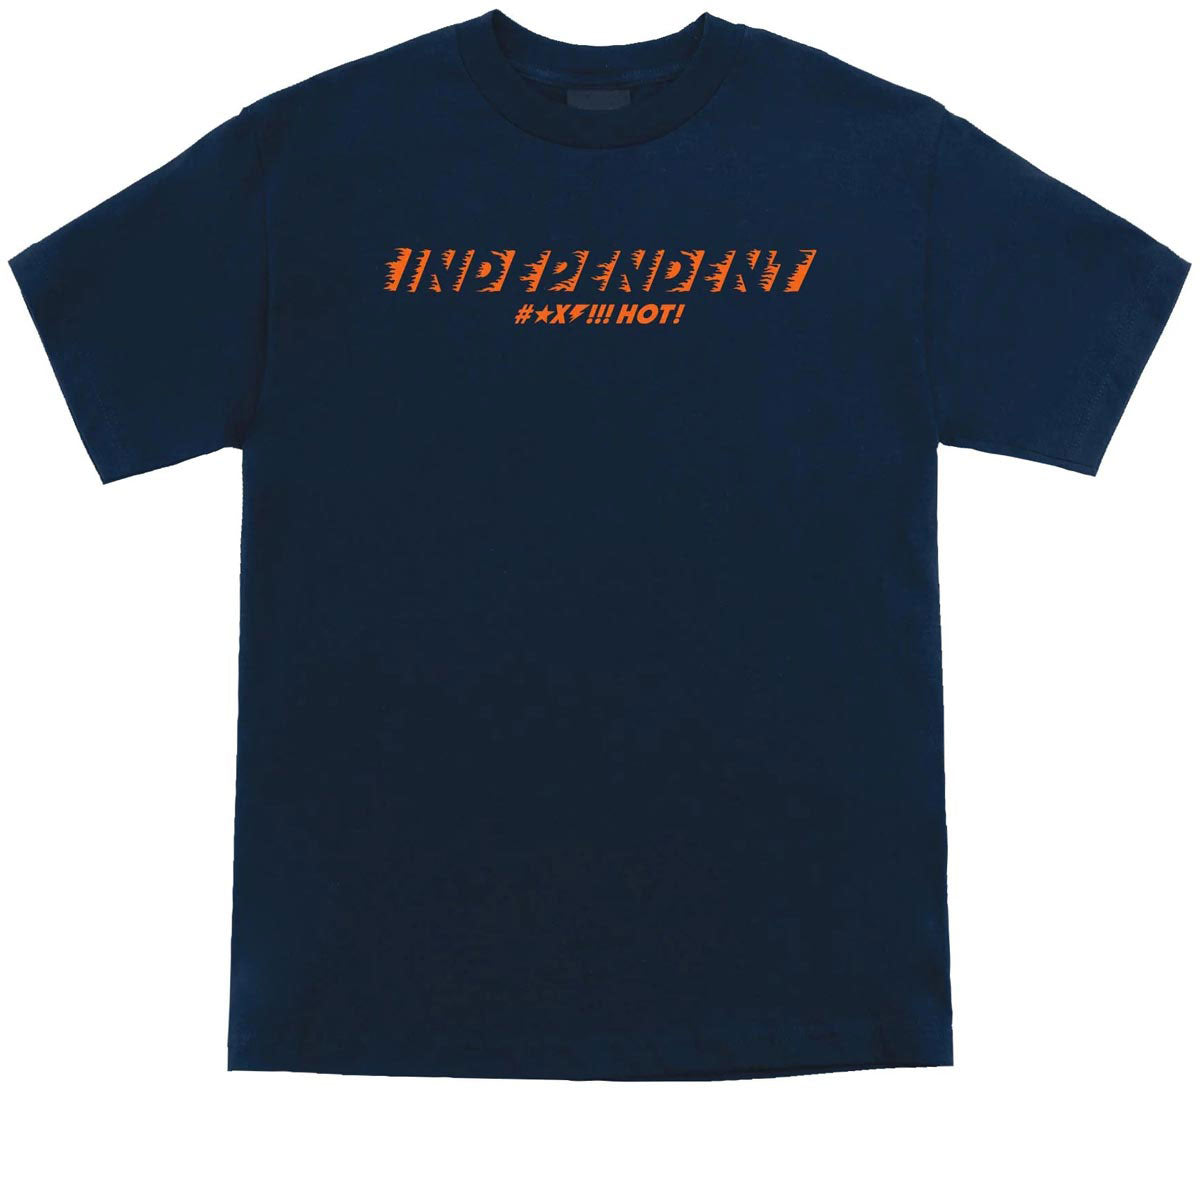 Independent Speed Flame Front T-Shirt - Navy image 1